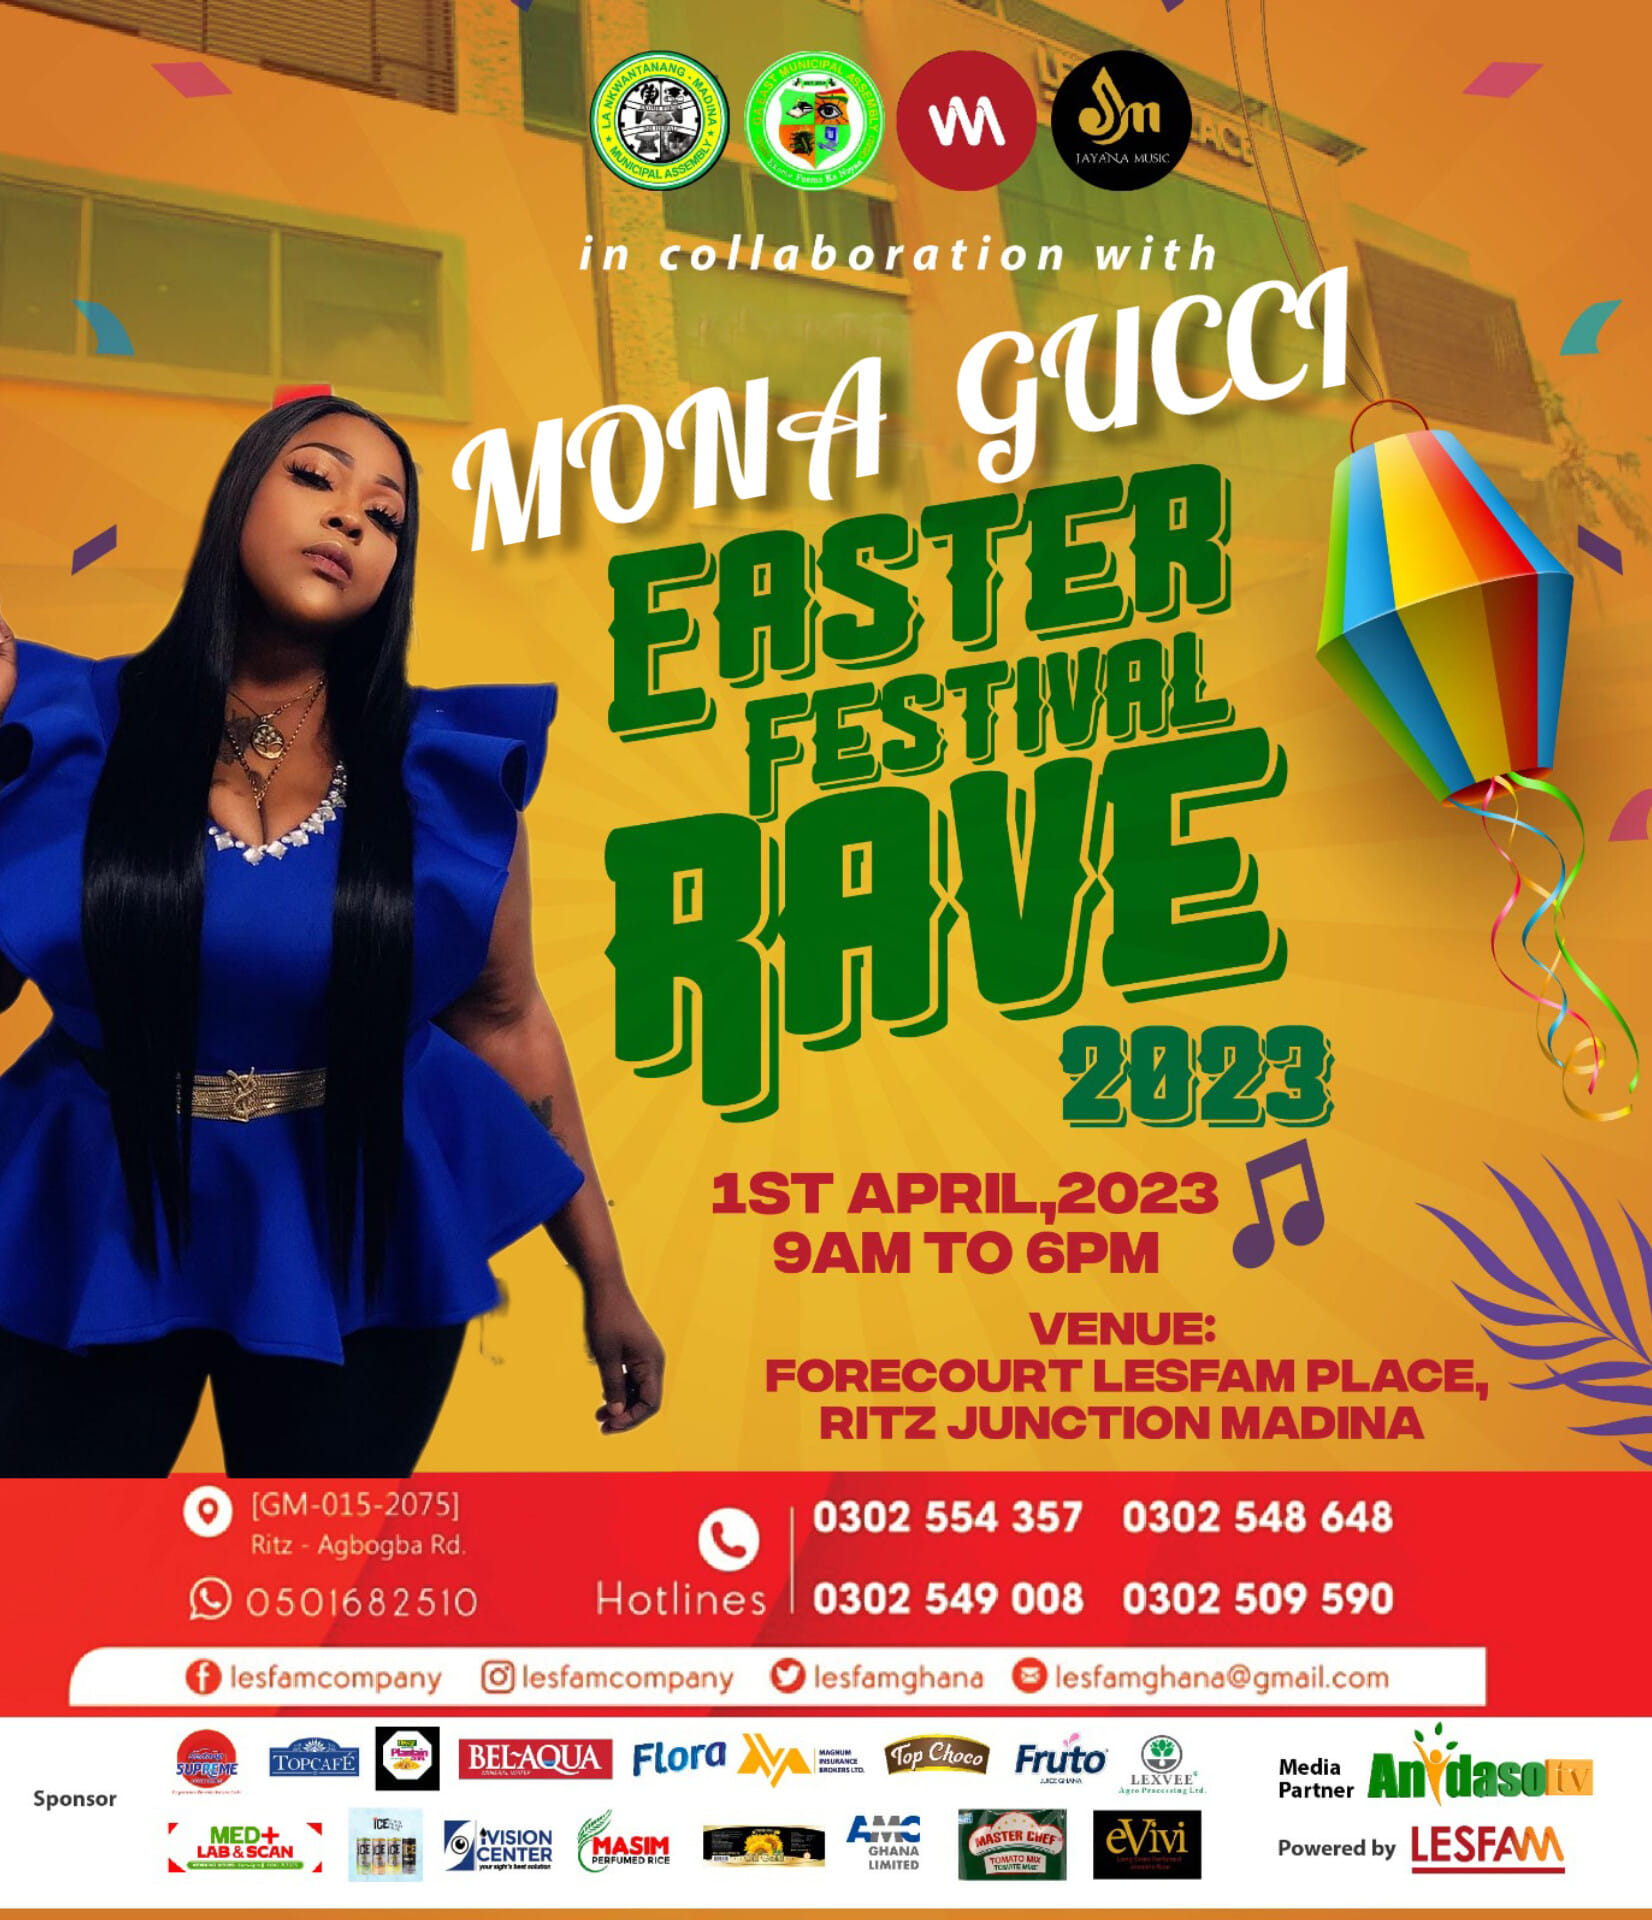 TV Personality Mona Gucci Celebrates Easter With Less Privileged On 1st April.2023 At Lesfam Place